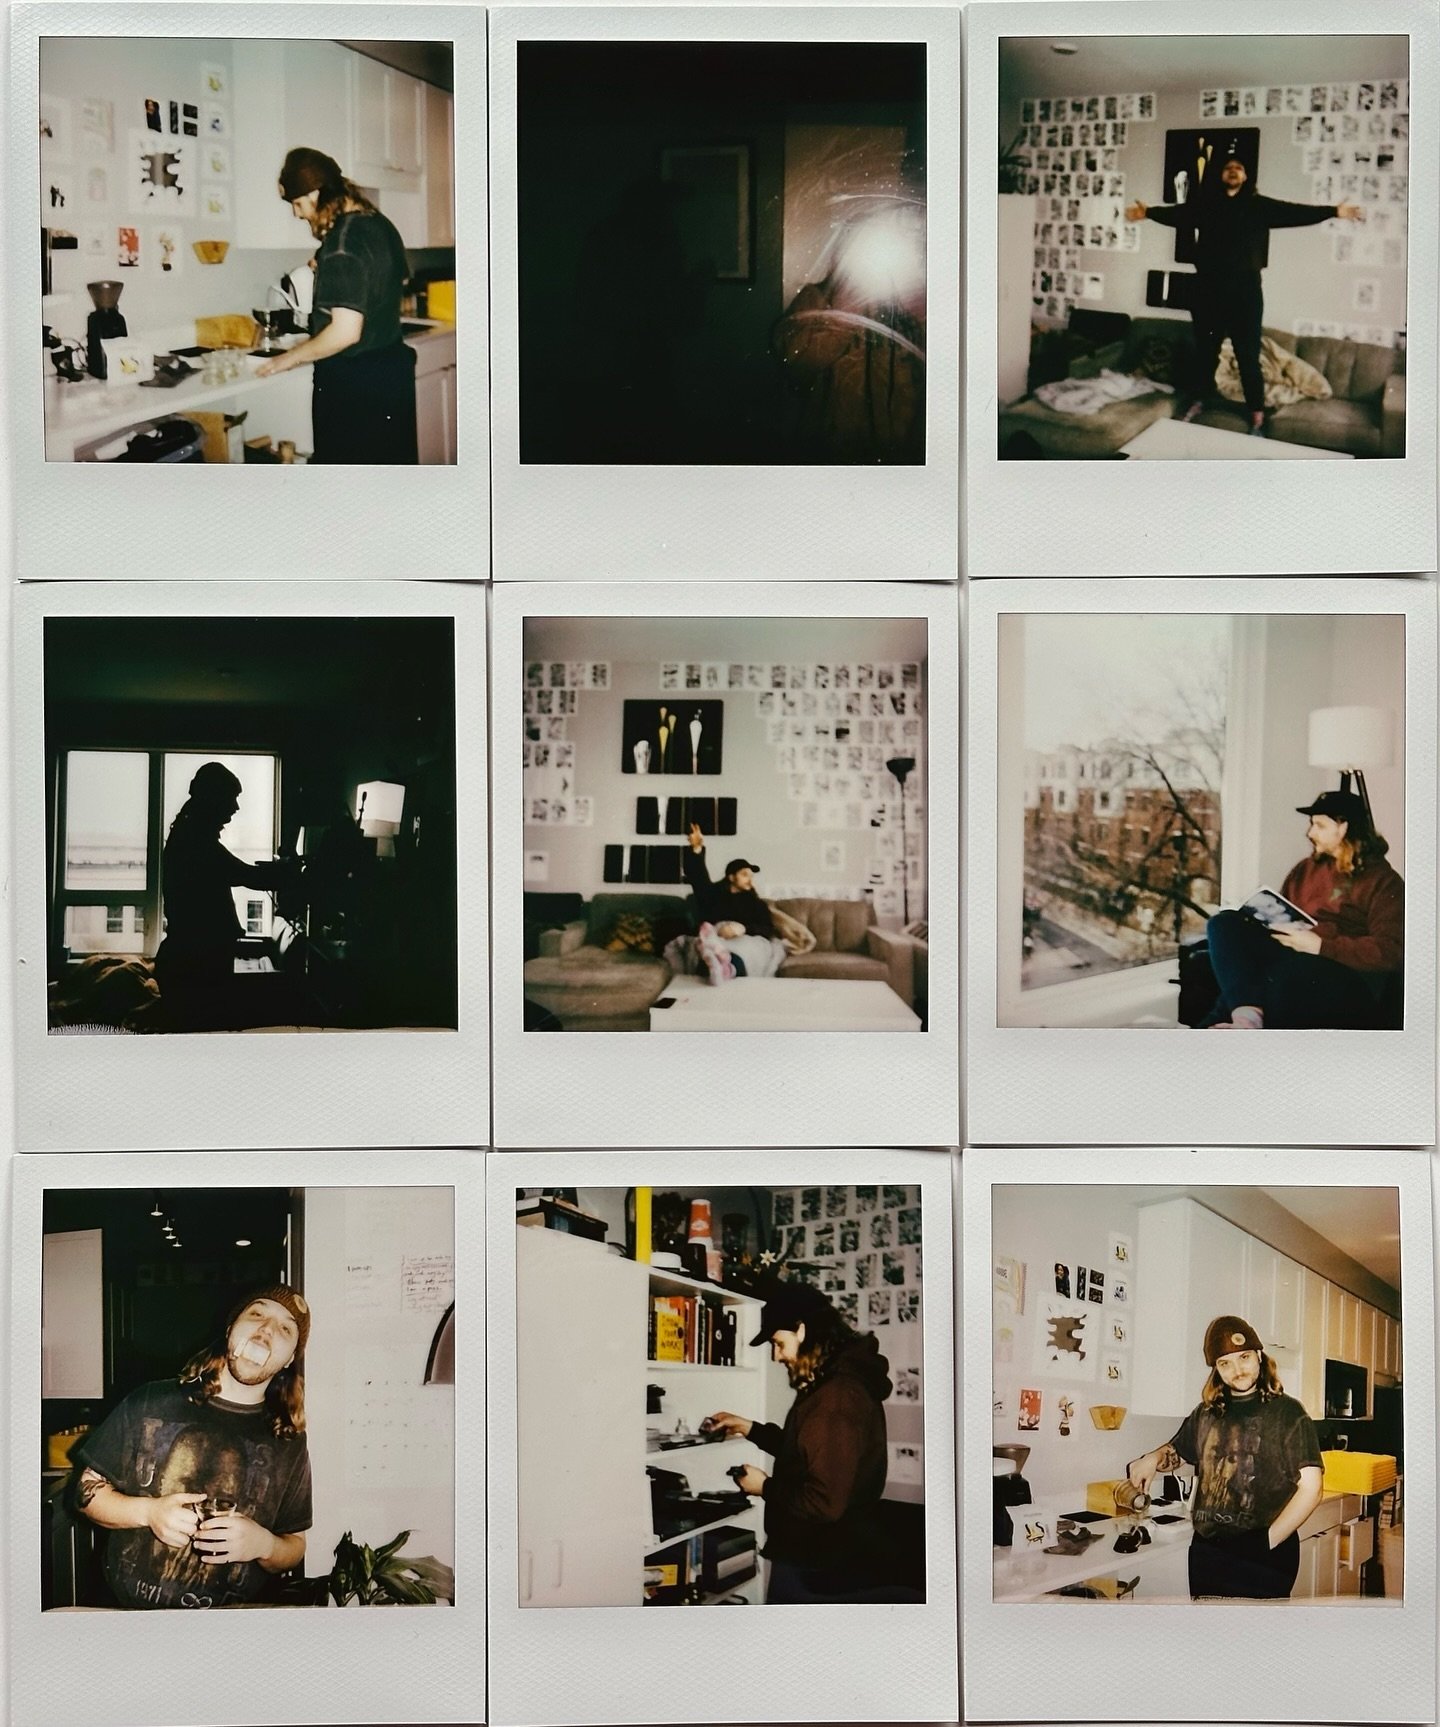 took some moving-week polaroids of my love. these moments feel so full, these memories so meaningful, in the truest sense of the word. these walls contained so much, and his soul now, too. as he leaves the key on the counter for the next lucky reside